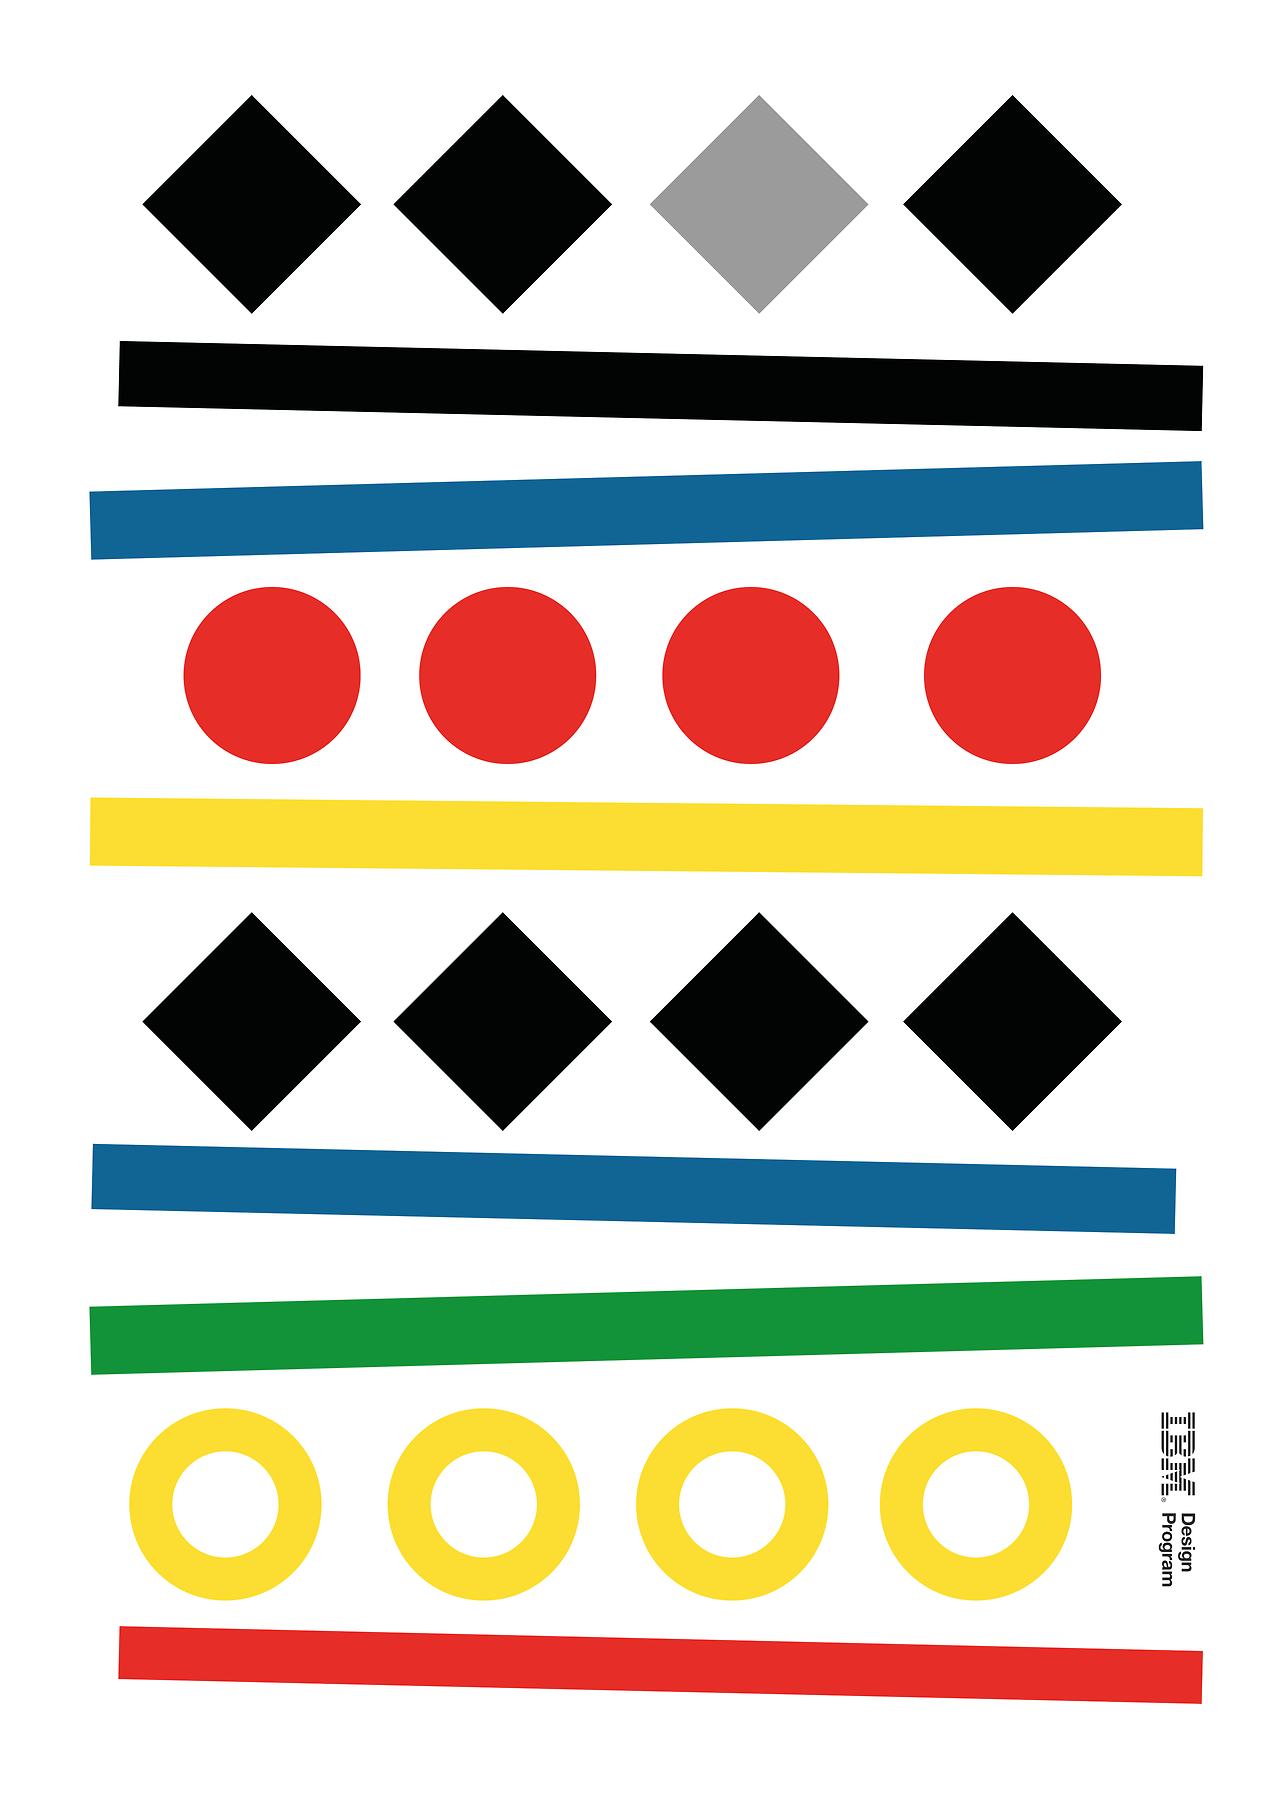 Stunning 1960s IBM Poster Art is Available Free From Designer's Site1280 x 1810